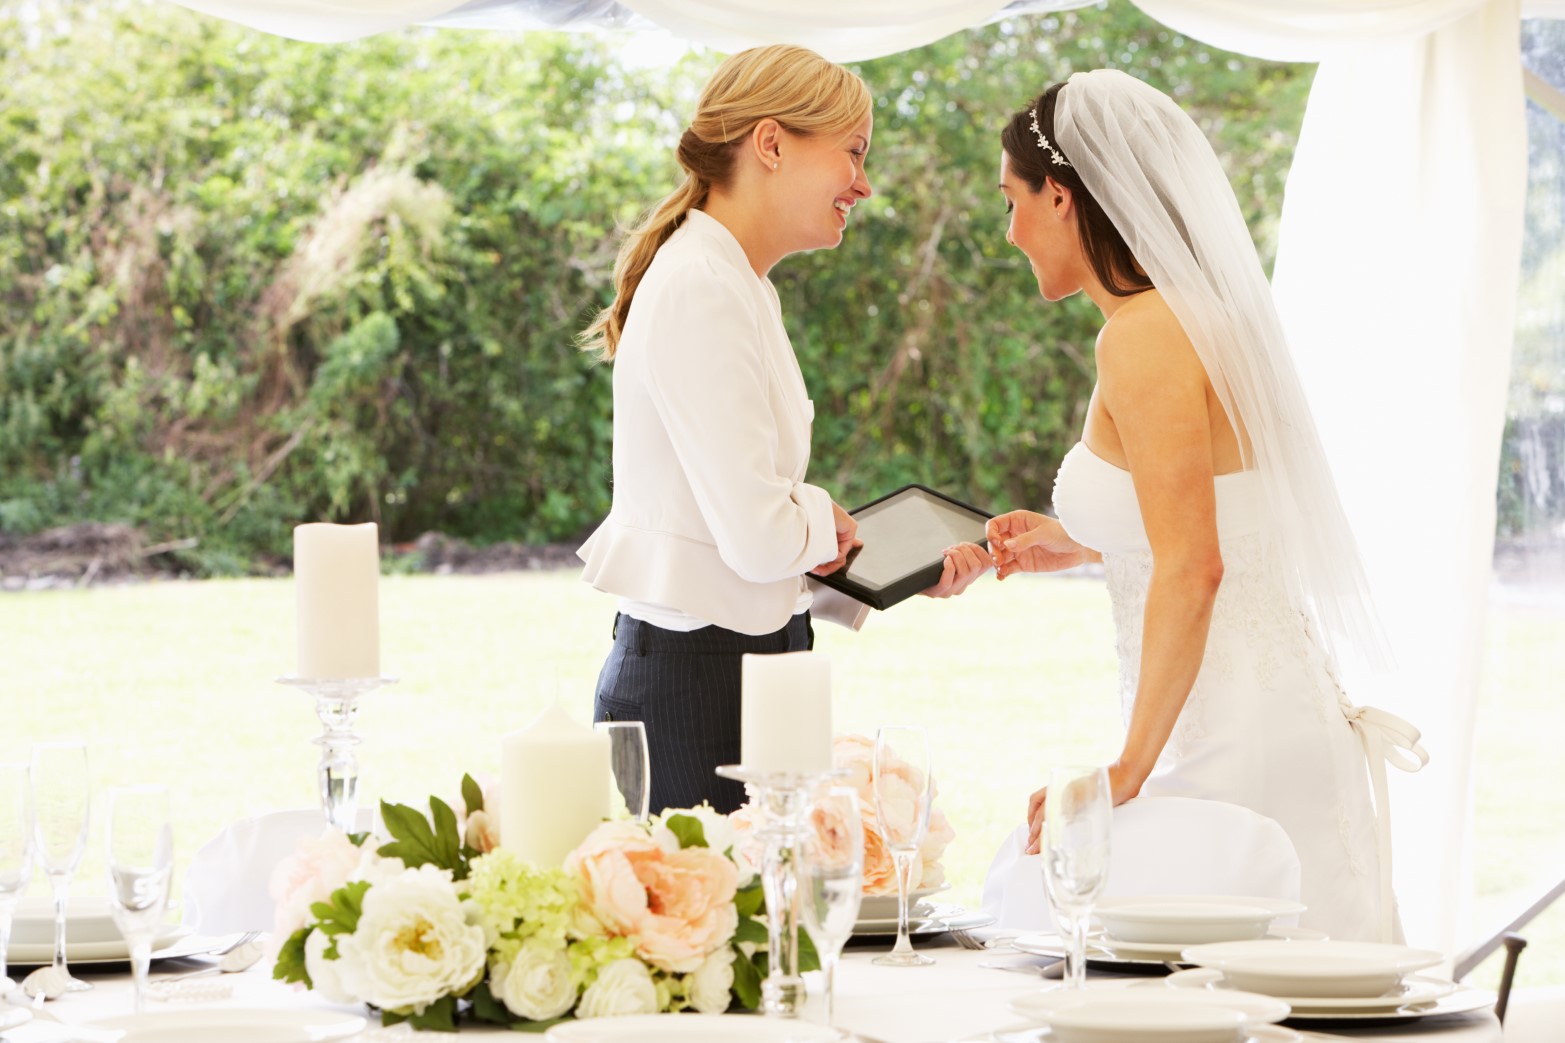 Wedding Planner and Events Management Diploma